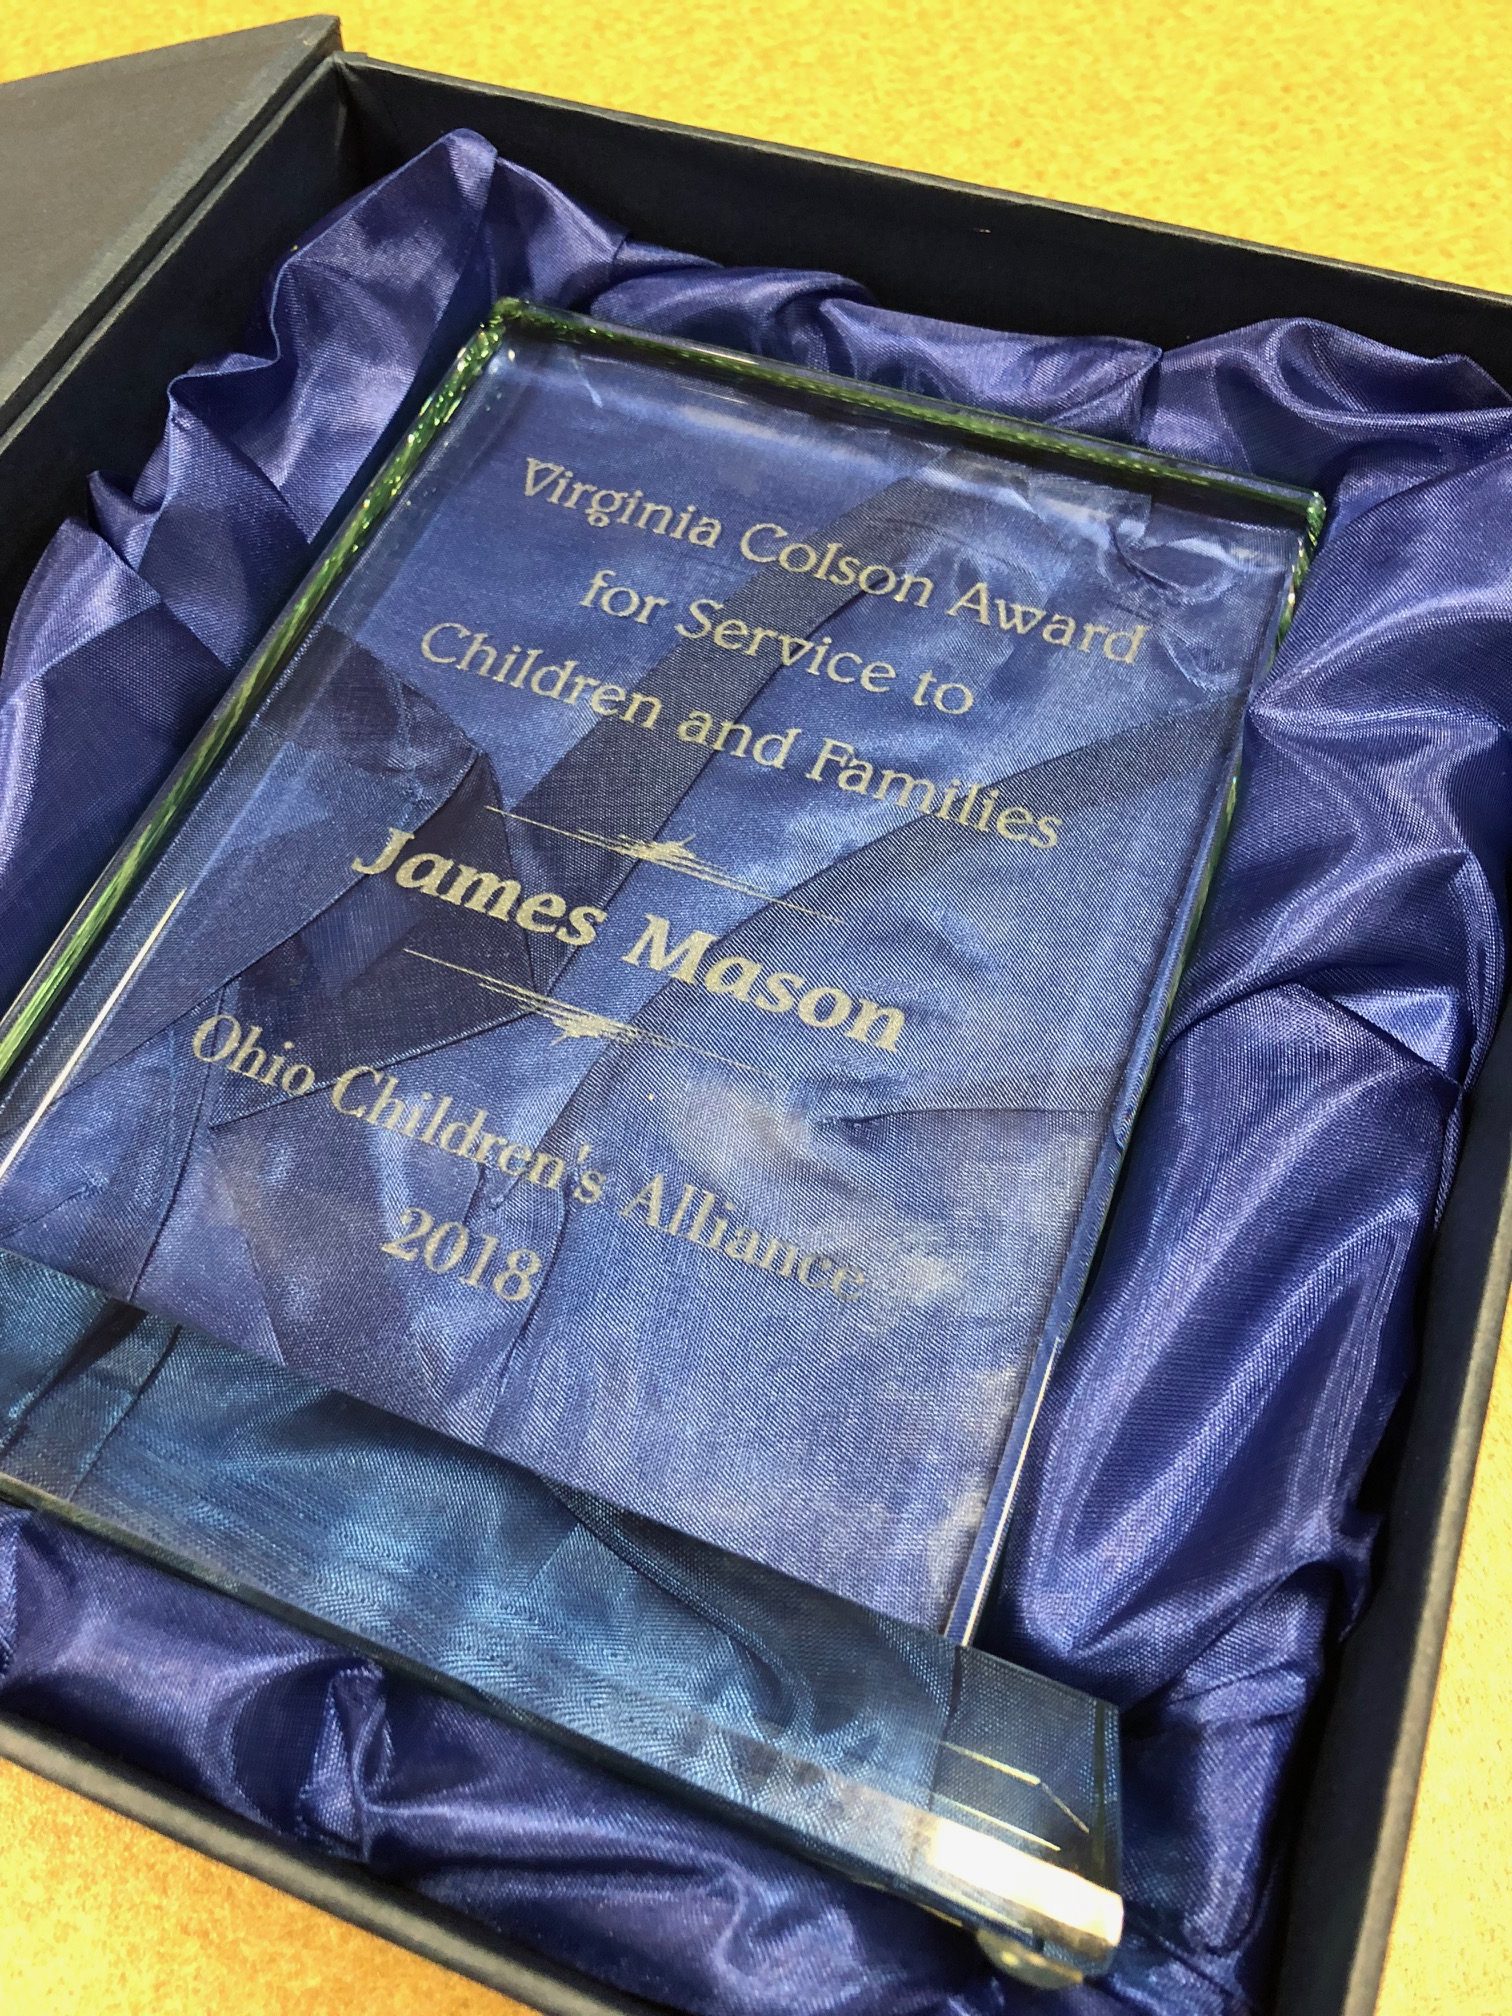 Jim Mason Receives 2018 Virginia Colson Award for Service to Families and Children